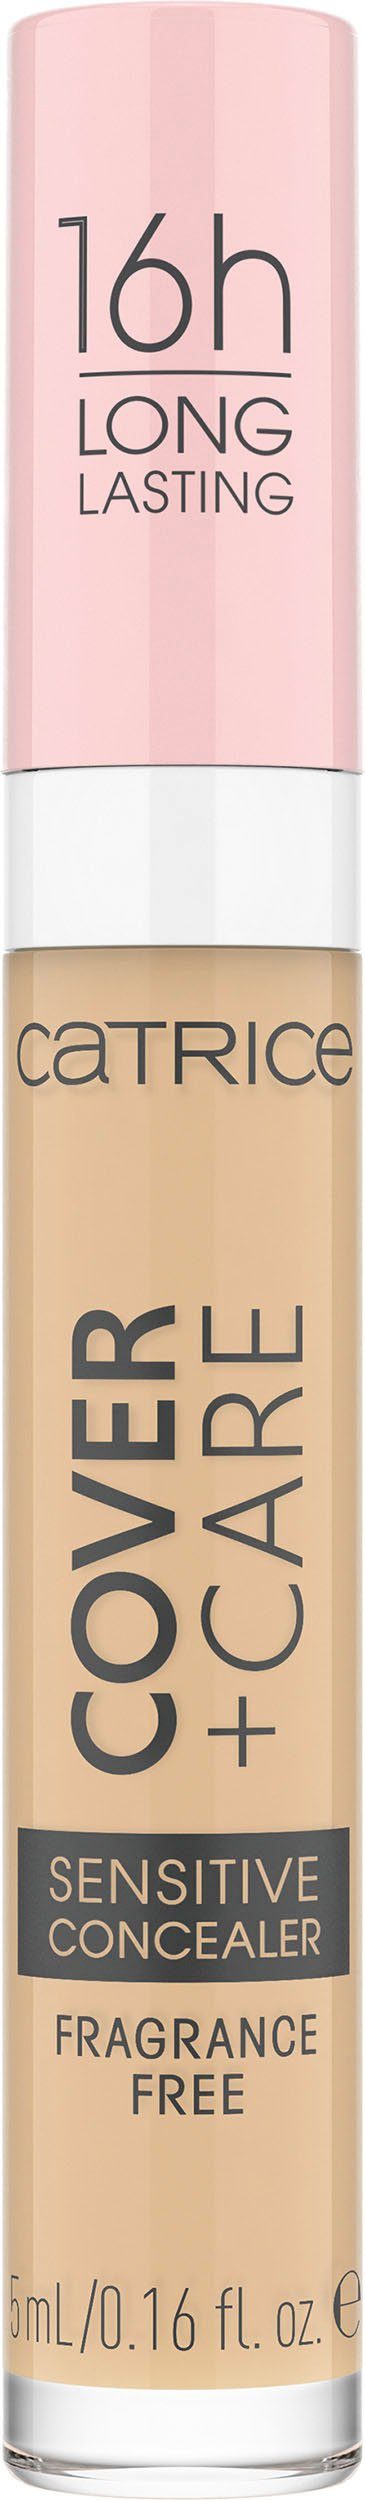 Care 008W Concealer, Catrice Cover nude Catrice + Sensitive Concealer 3-tlg.